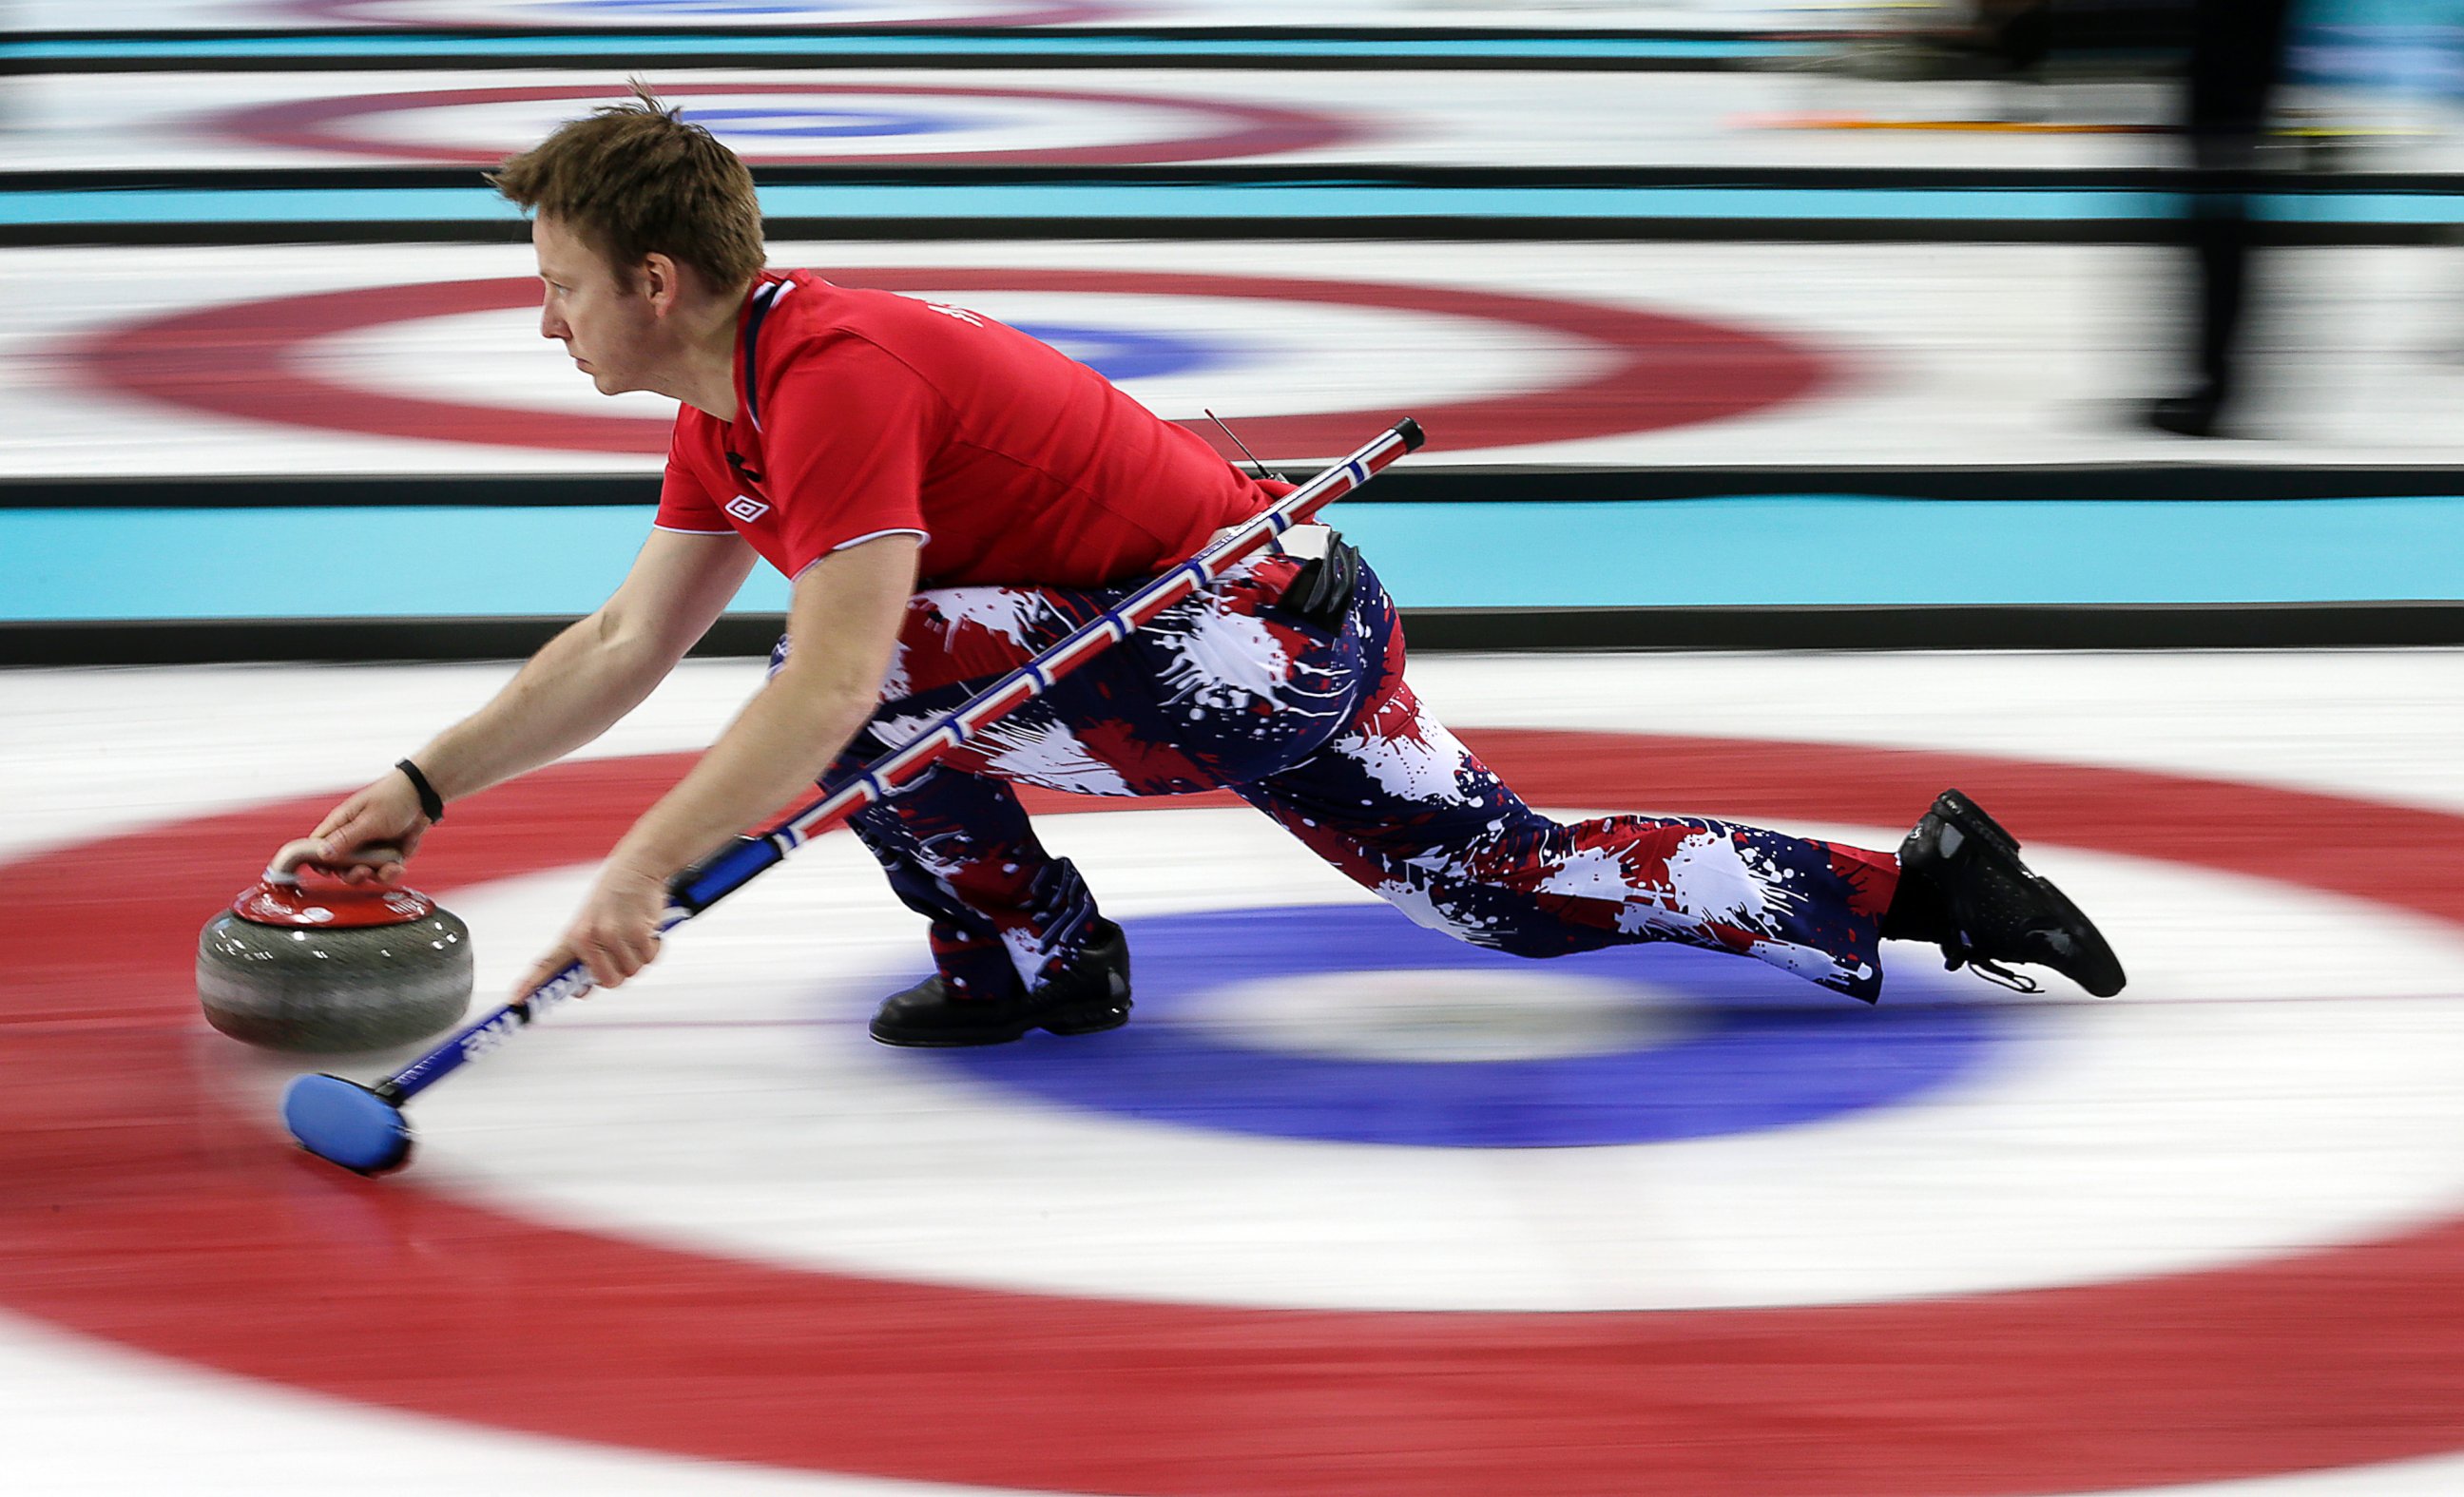 PHOTO: Norway's Torger Nergaard delivers the rock during the men's curling competition against Russia at the 2014 Winter Olympics, Feb. 11, 2014, in Sochi, Russia.